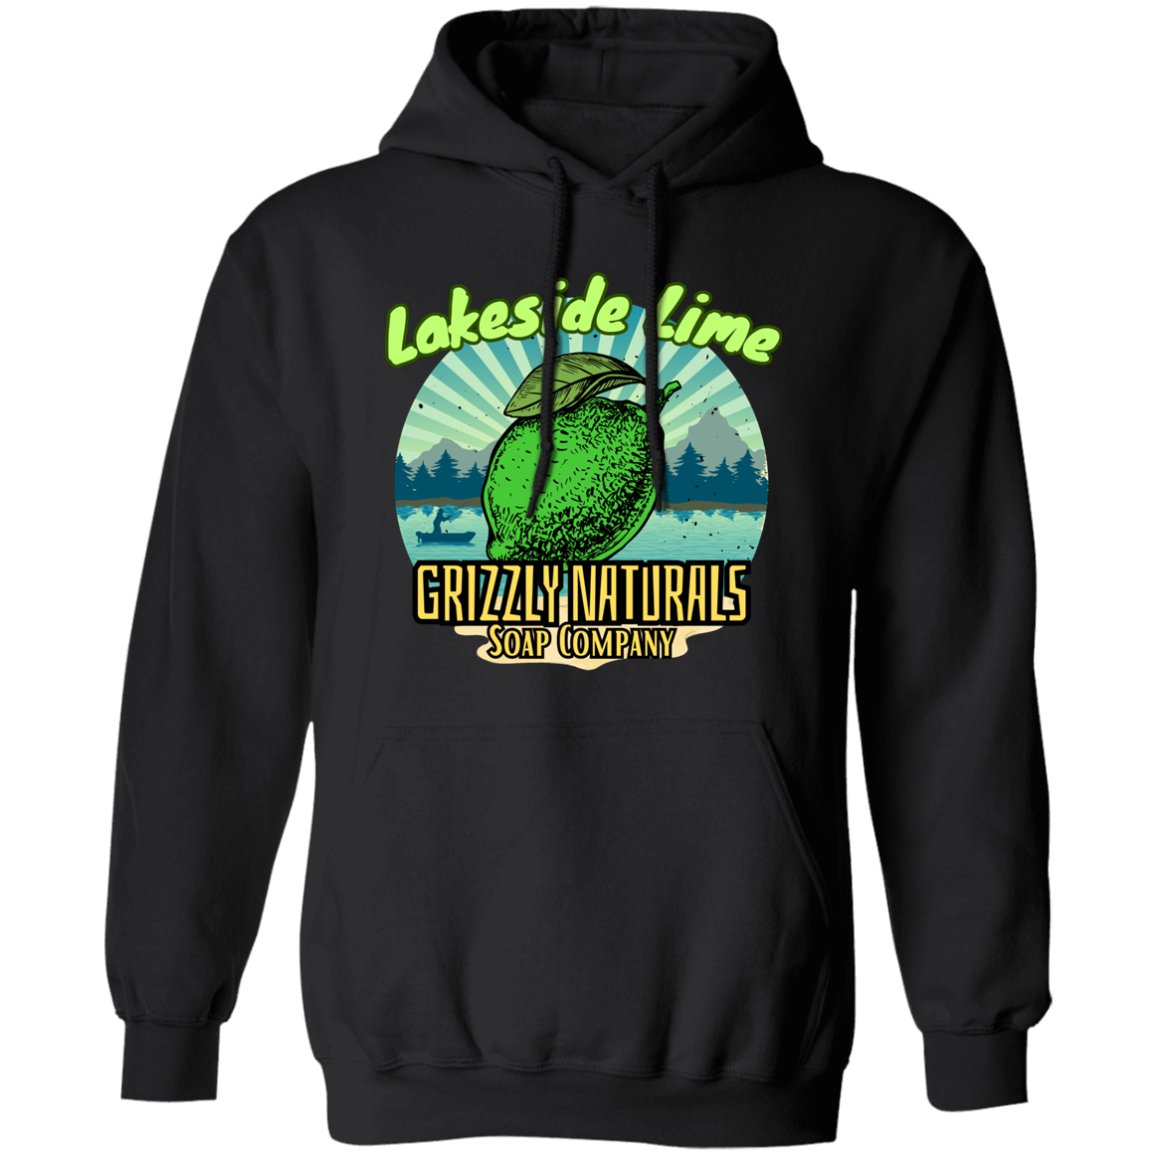 Grizzly Naturals Apparel - Lakeside Lime - Grizzly Naturals Soap Company